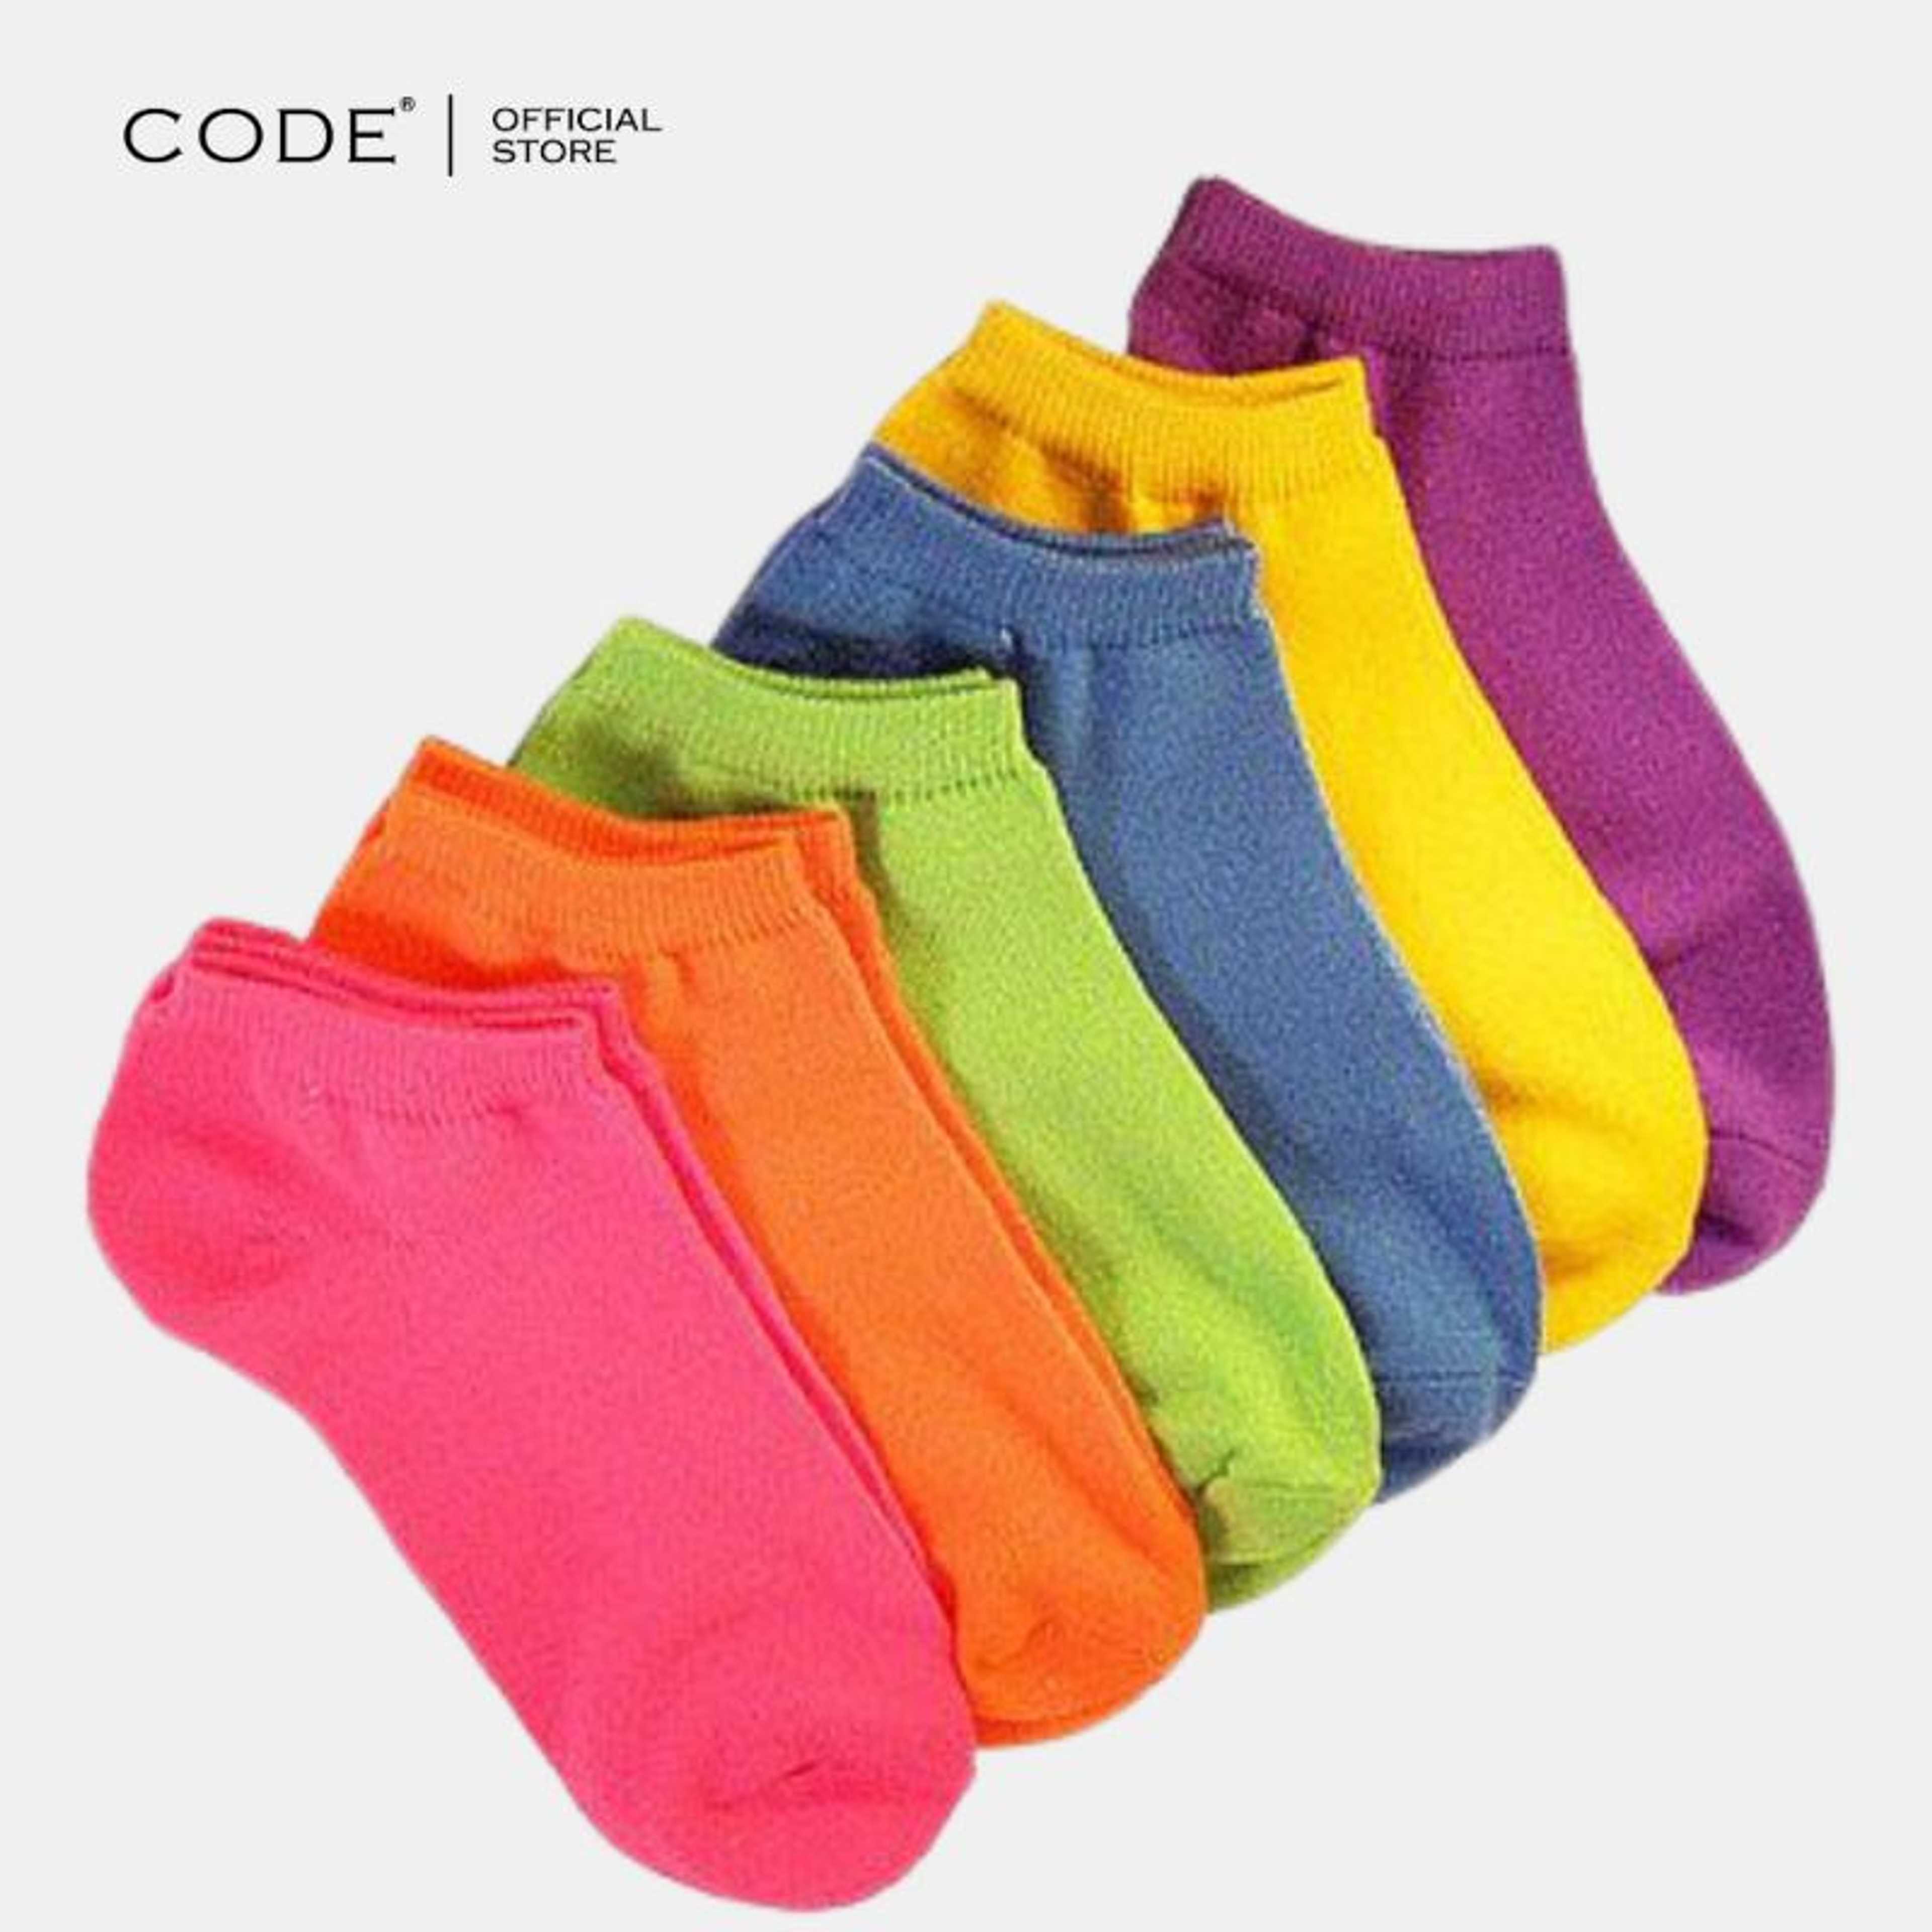 Code 6 Pairs Cotton Ankle Socks For Girls - Cotton Ankle Socks For Women - No Show Low Cut Socks For Men Women - Business Casual Socks For Women - 3 Random Colors